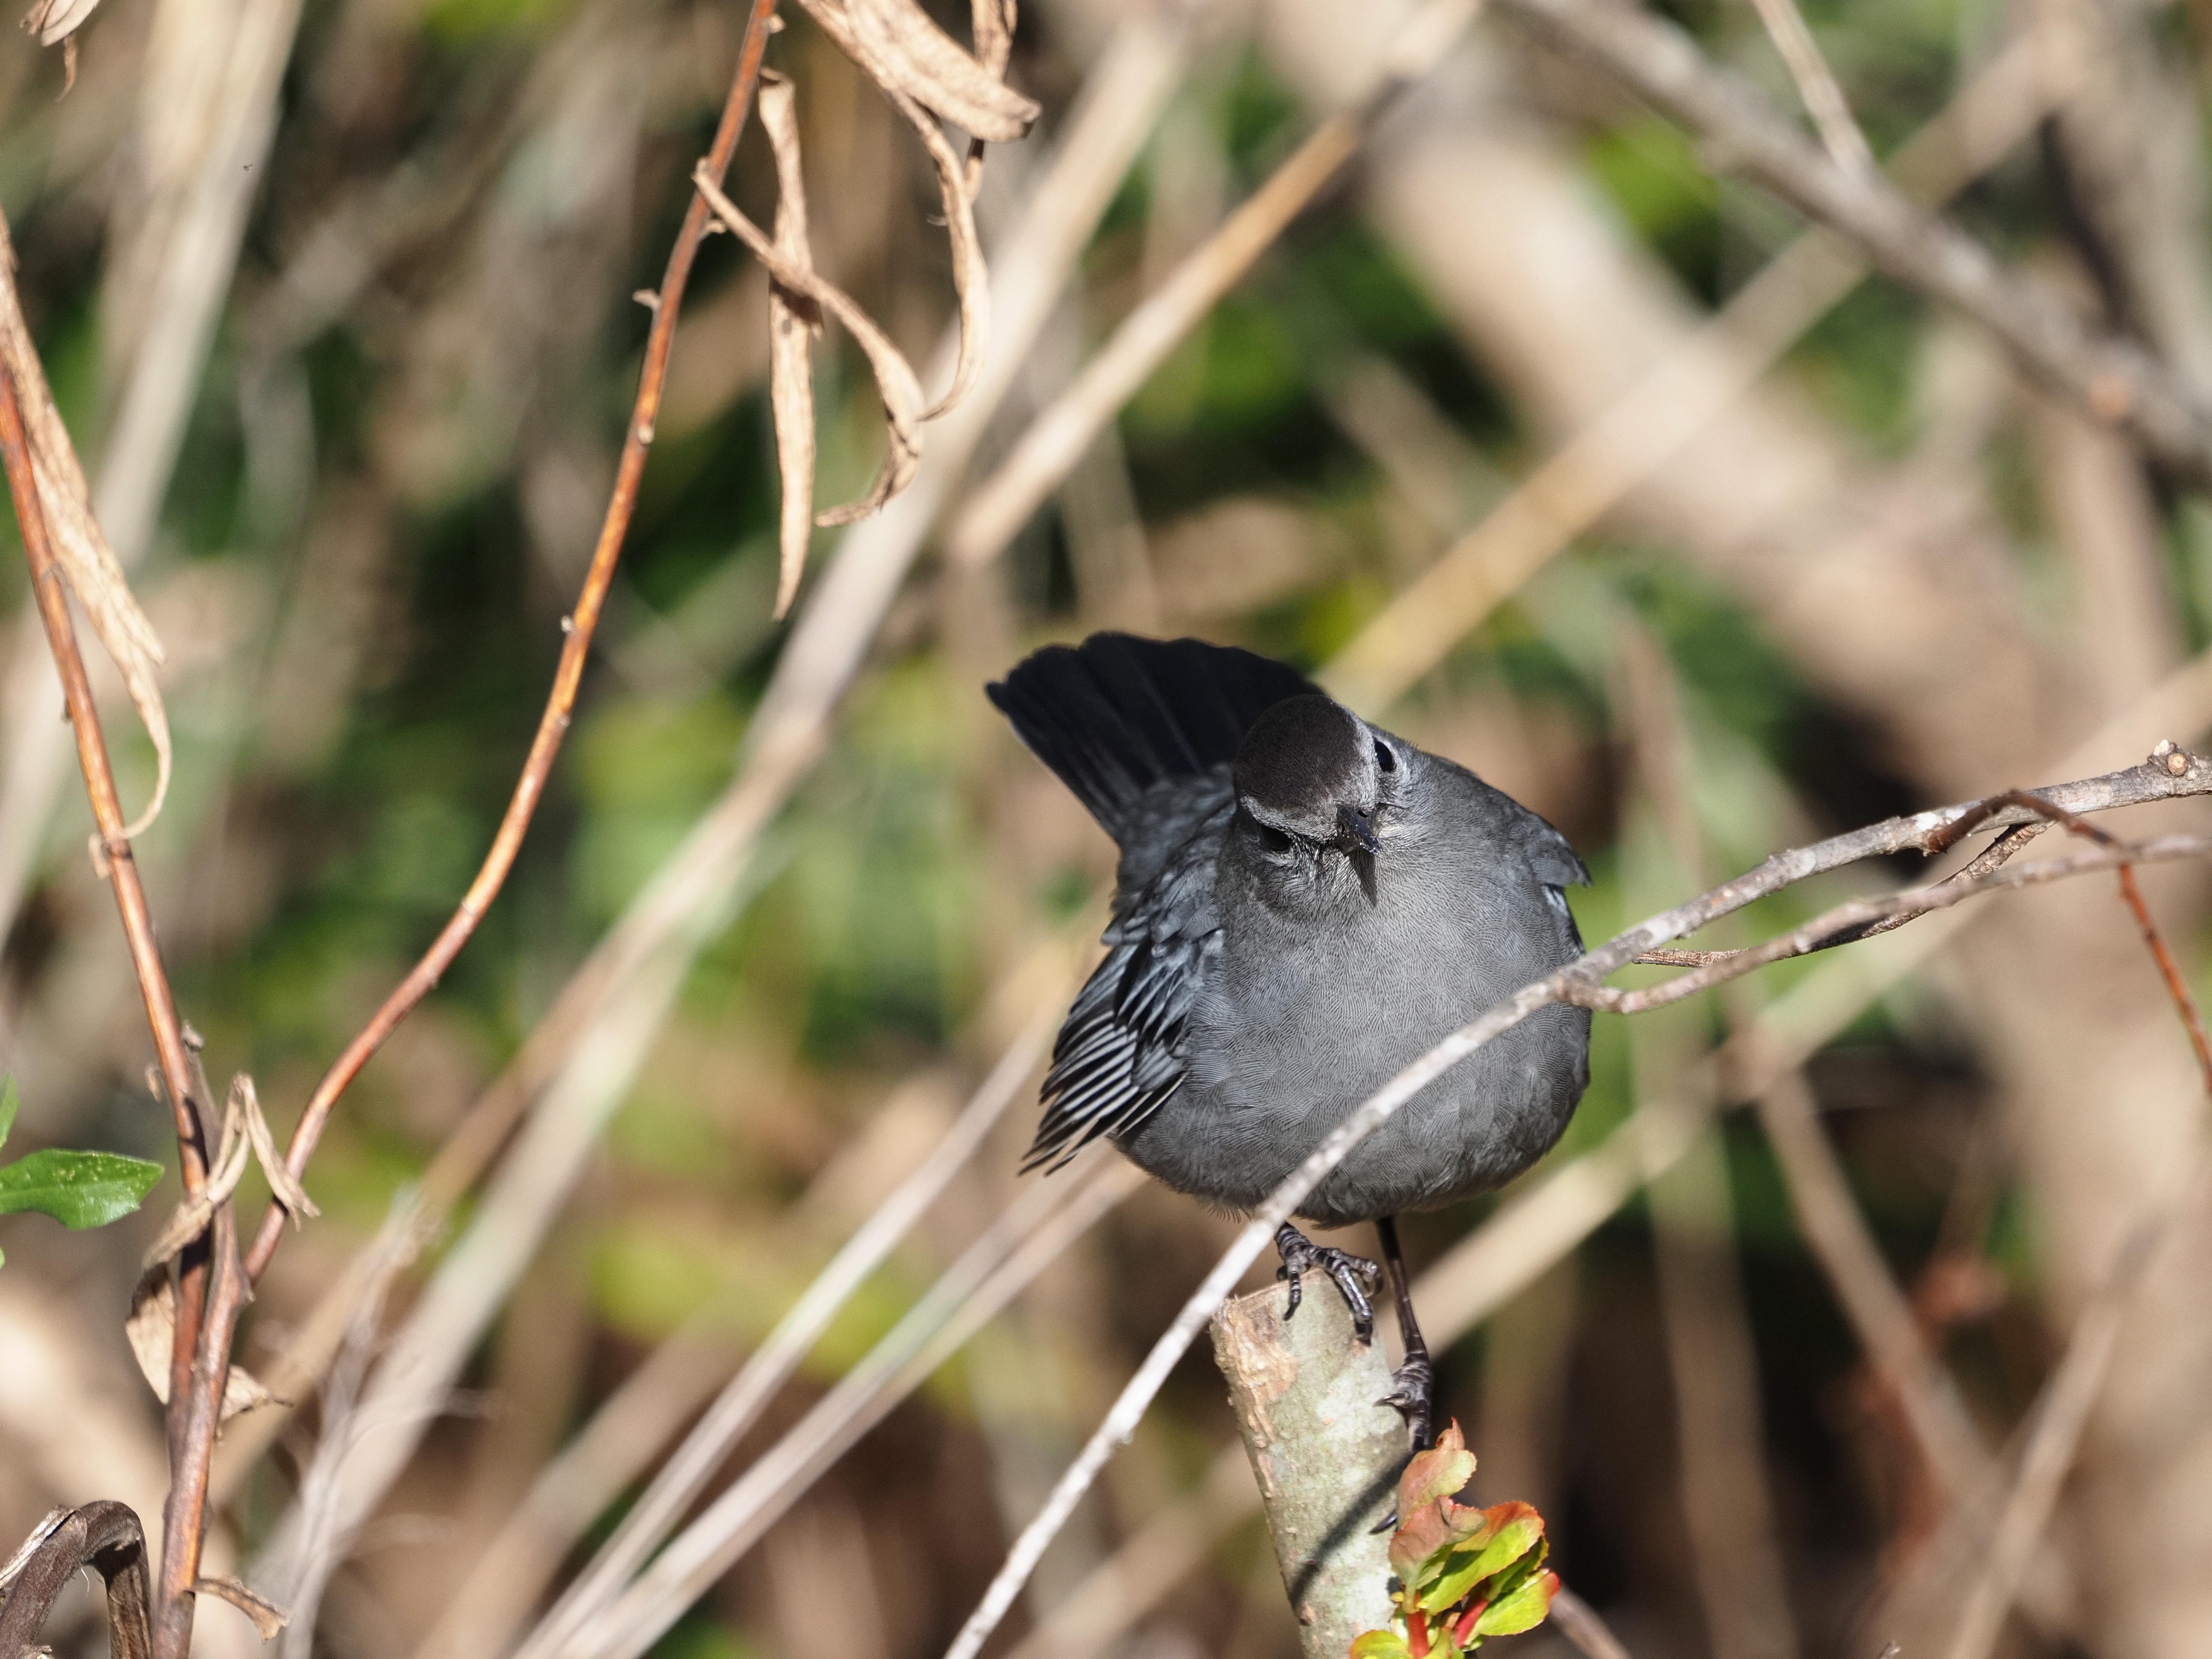 Photograph of a Gray Cat Bird perched on a branch.